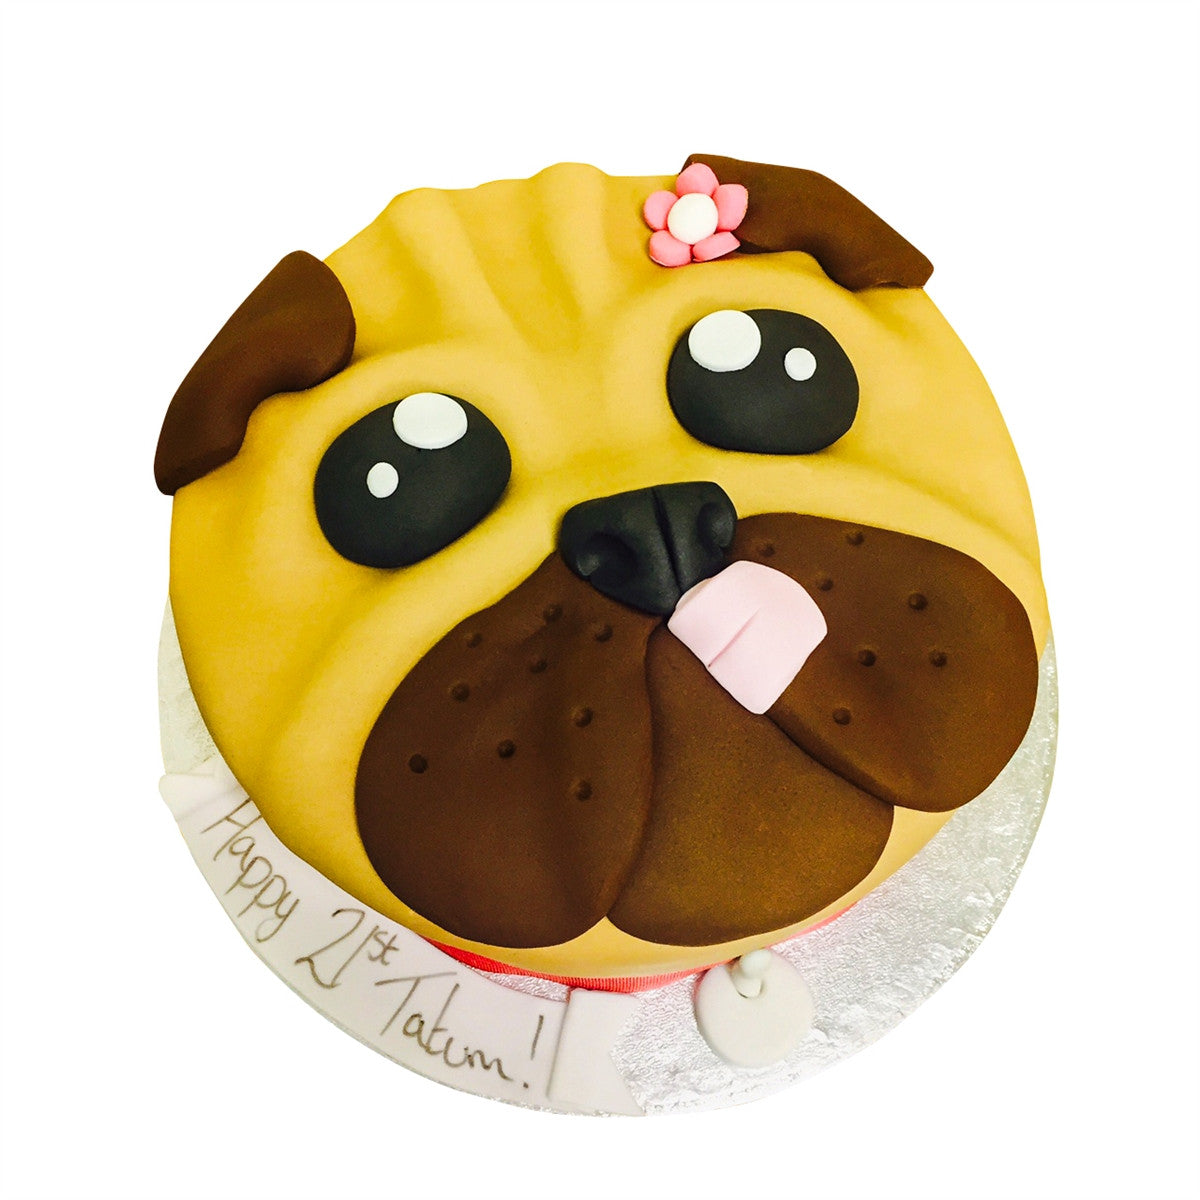 EDIBLE Pug dog puppy Cake Topper Birthday Party Wafer Paper / icing 19cm |  eBay